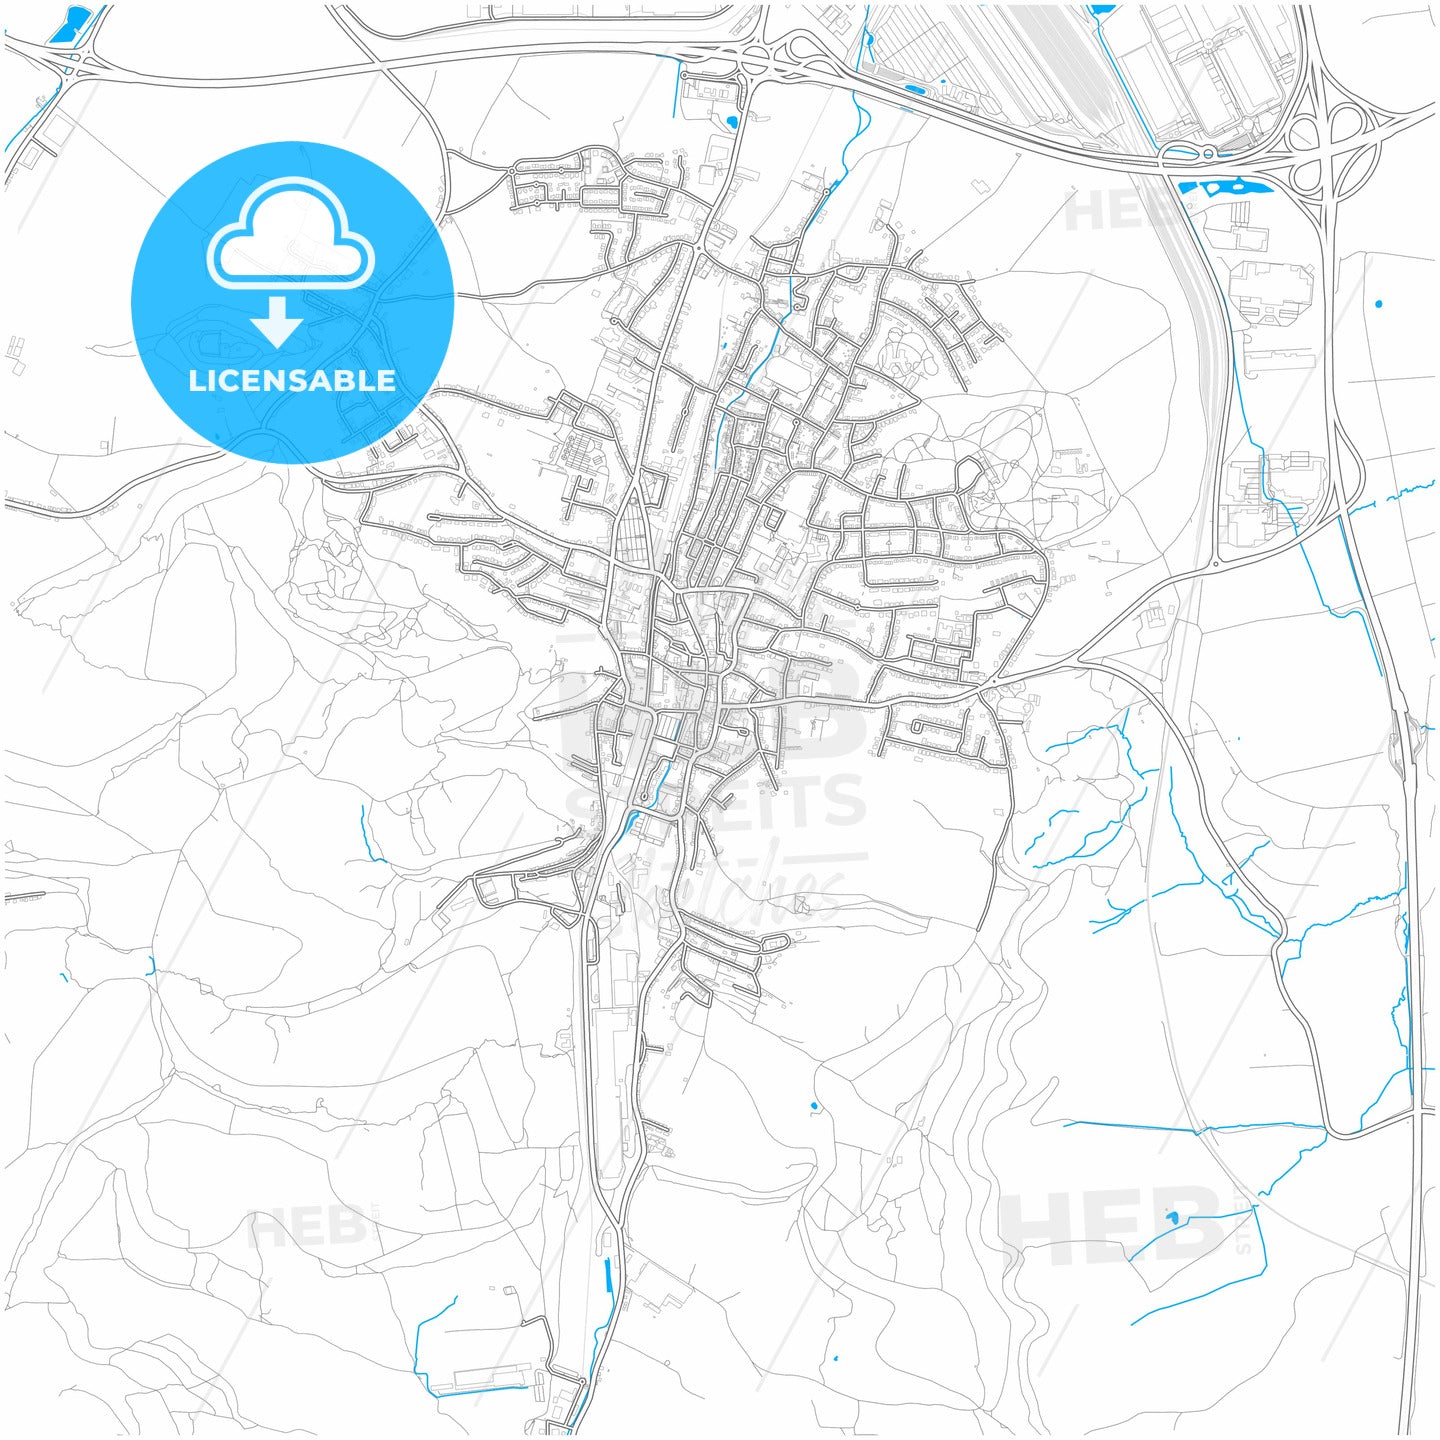 Dudelange, Esch-sur-Alzette, Luxembourg, city map with high quality roads.